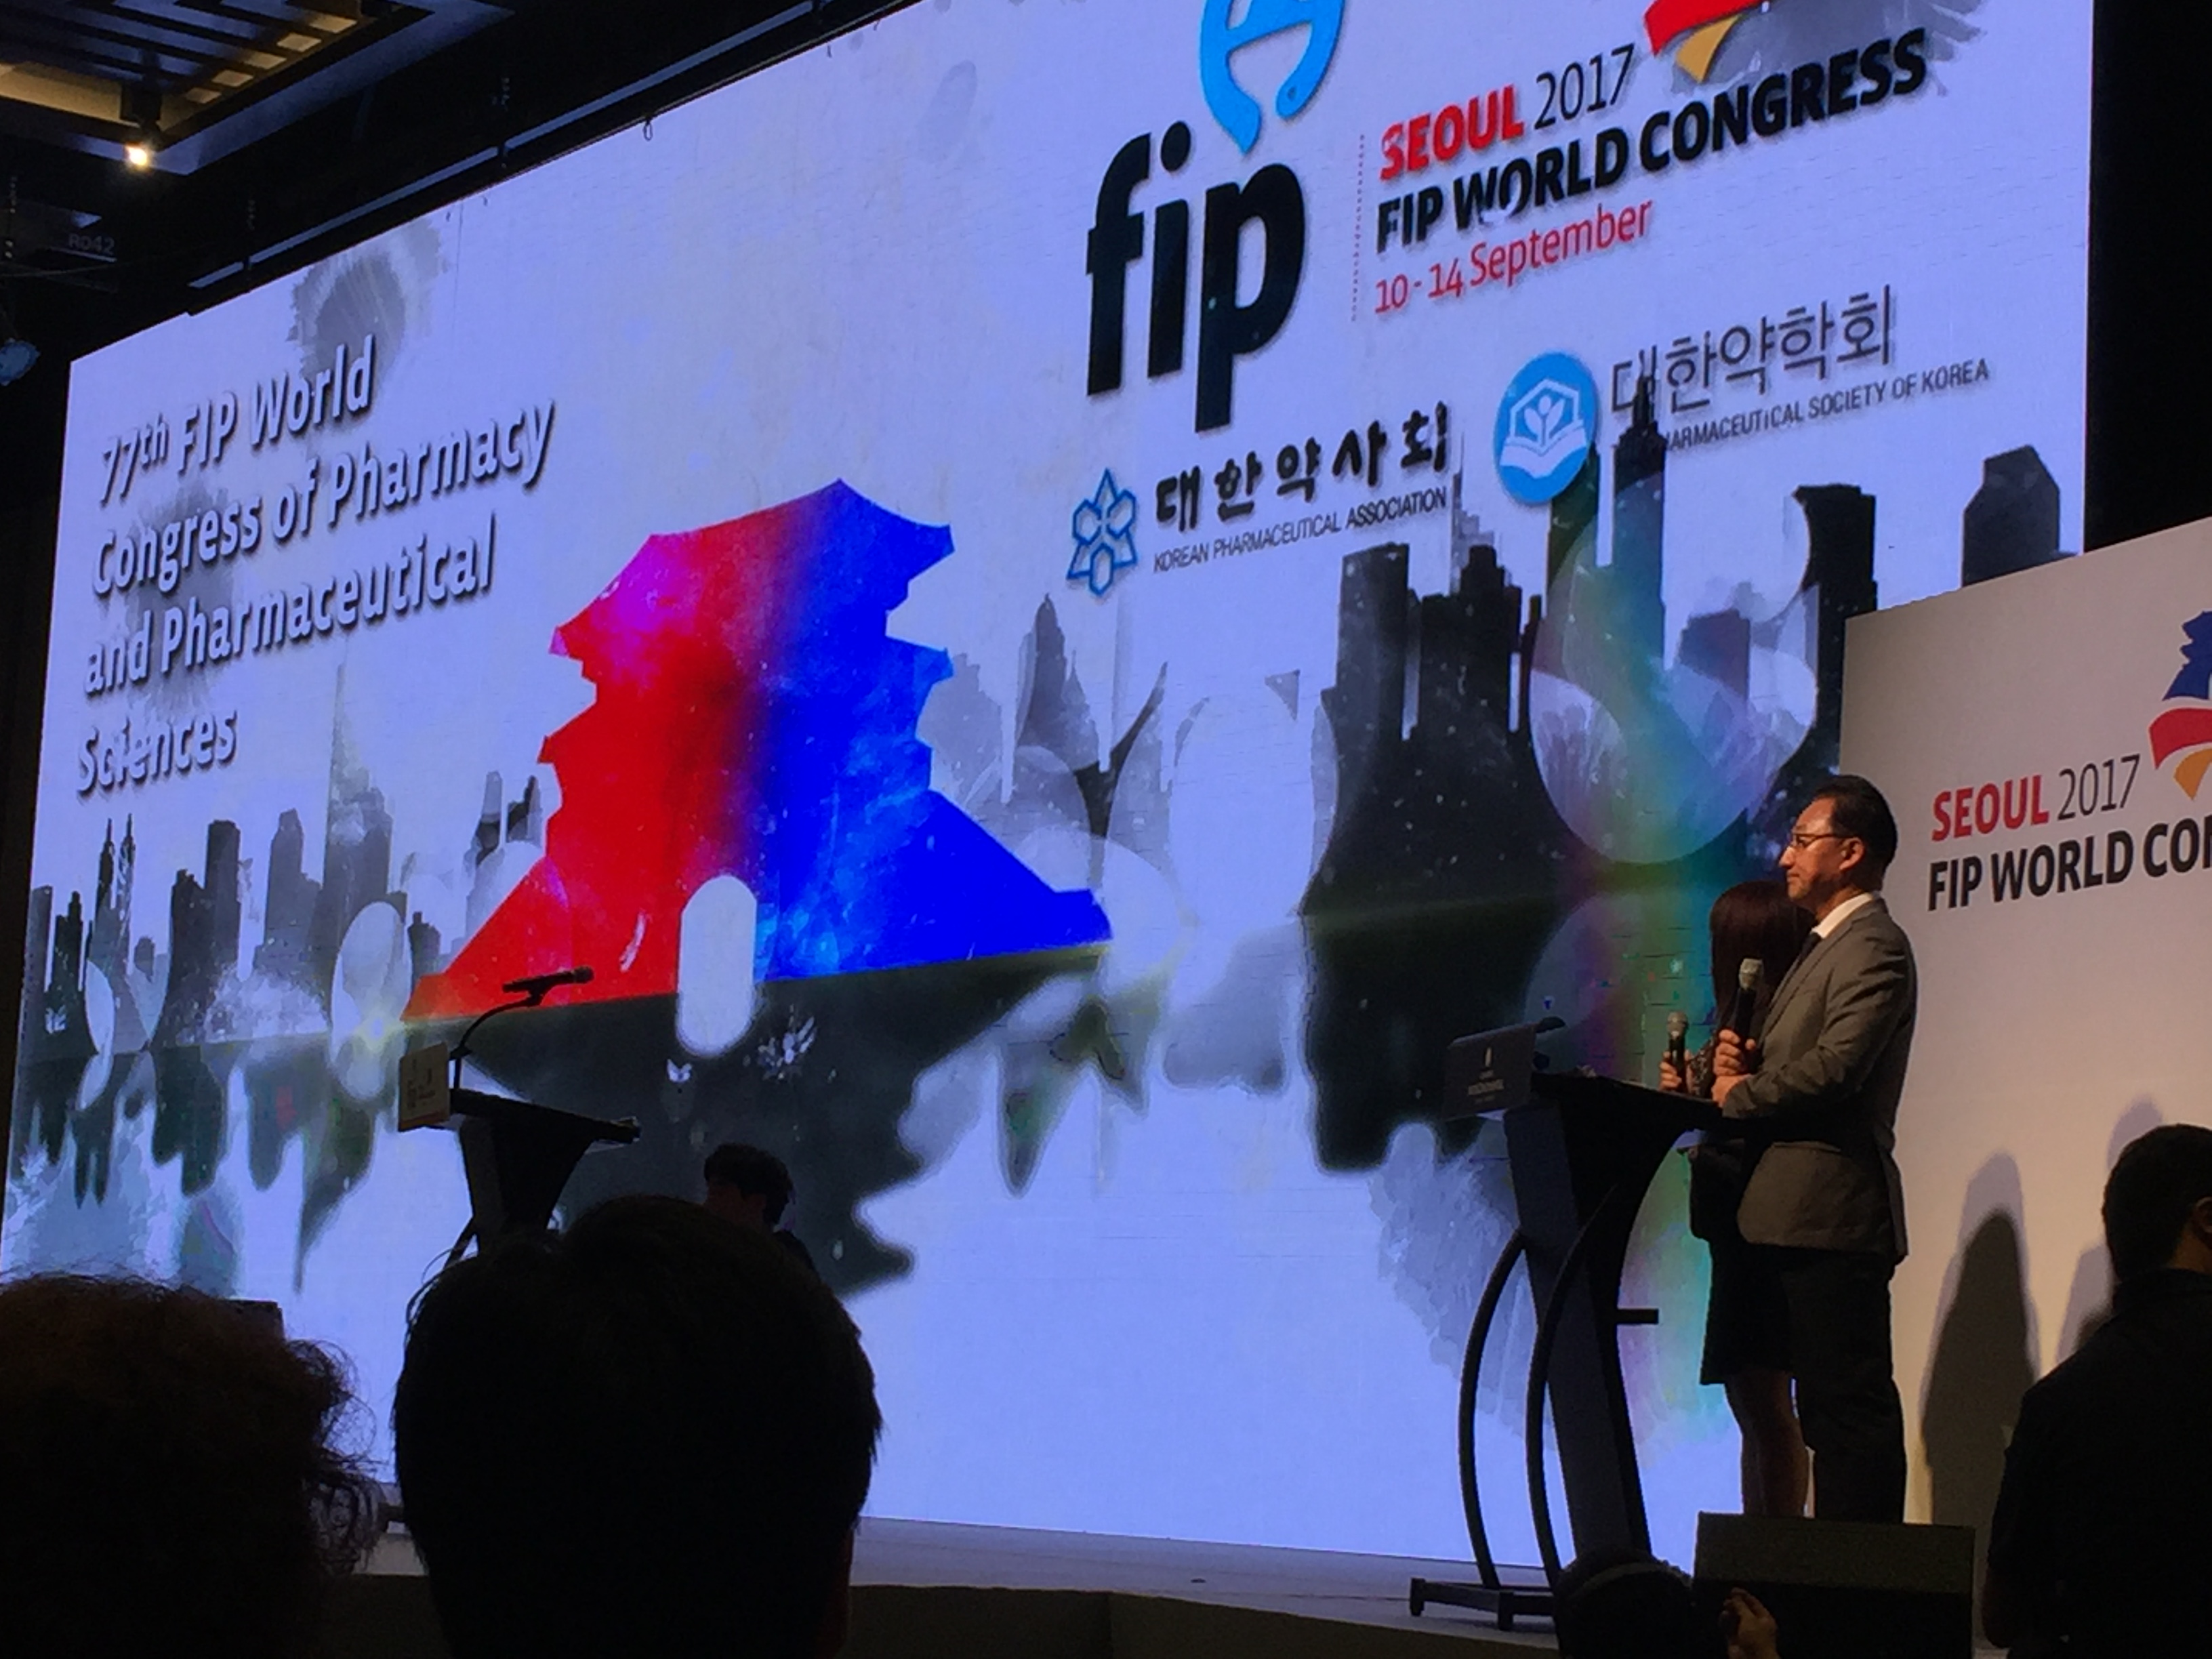 FIP 2017 서울 총회 개막식(77th FIP World Congress of Pharmacy and Pharmaceutical Sciences 2017)2번사진